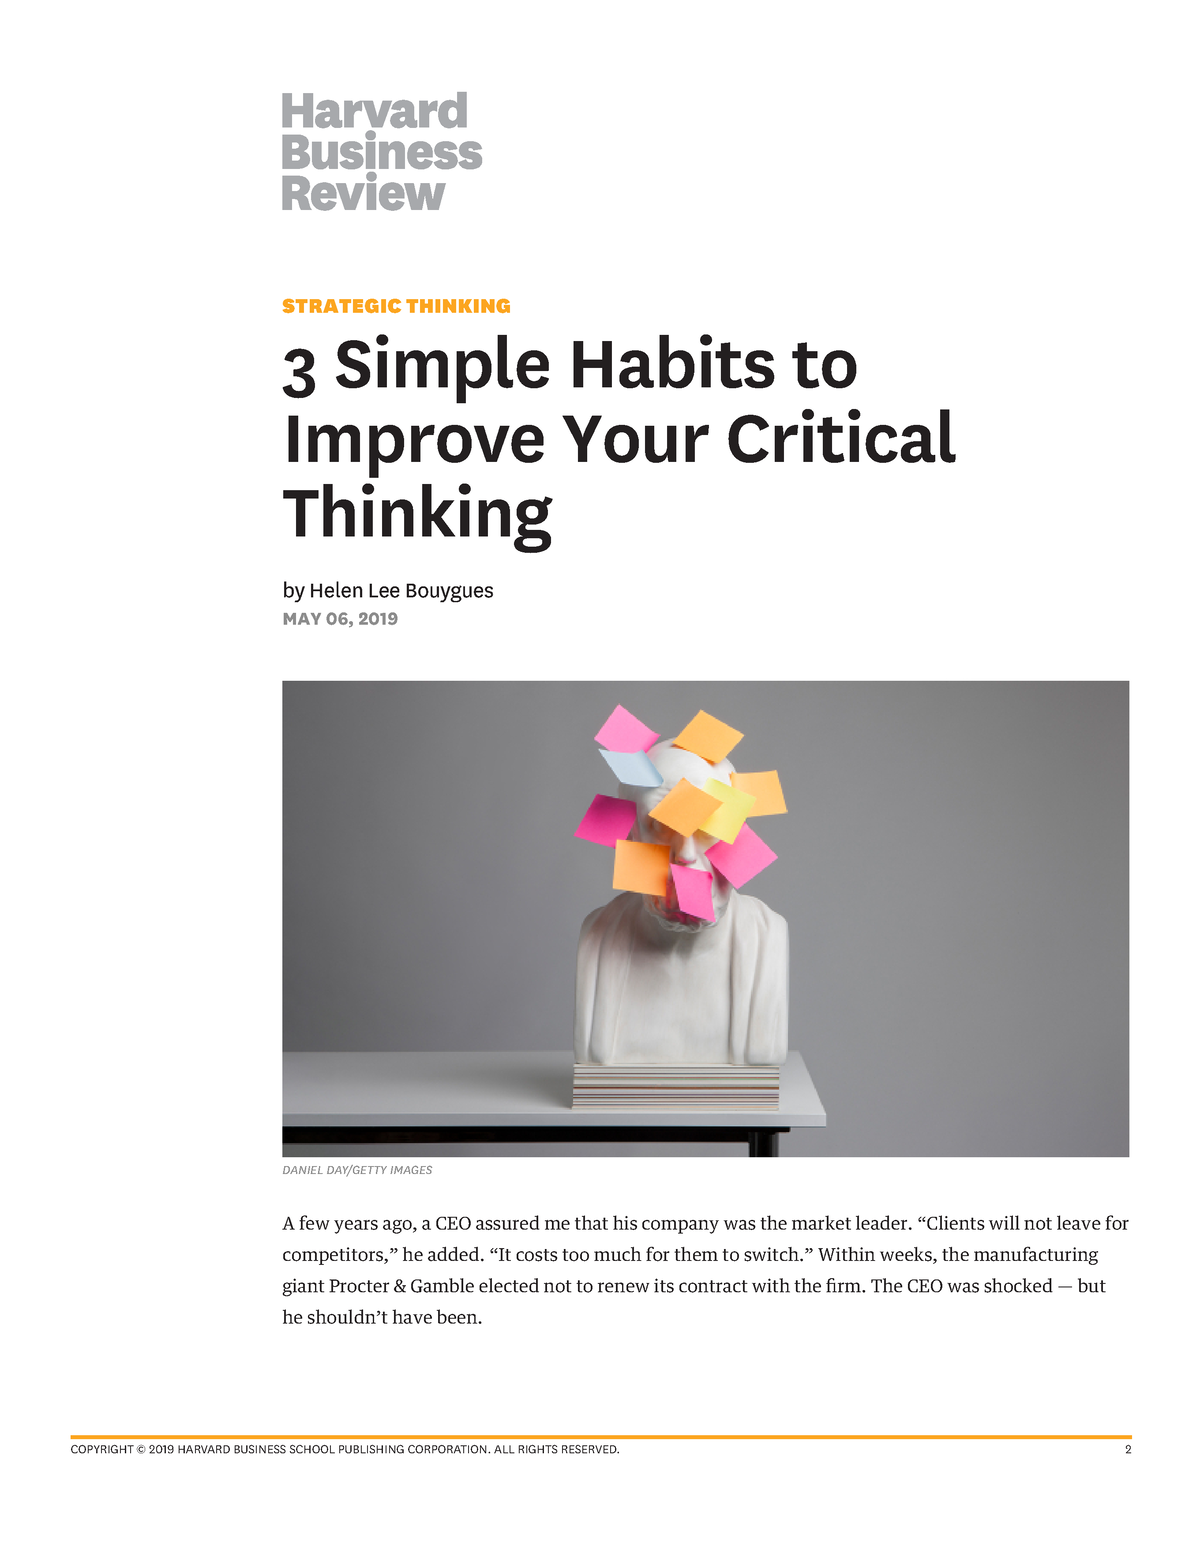 hbr guide to critical thinking